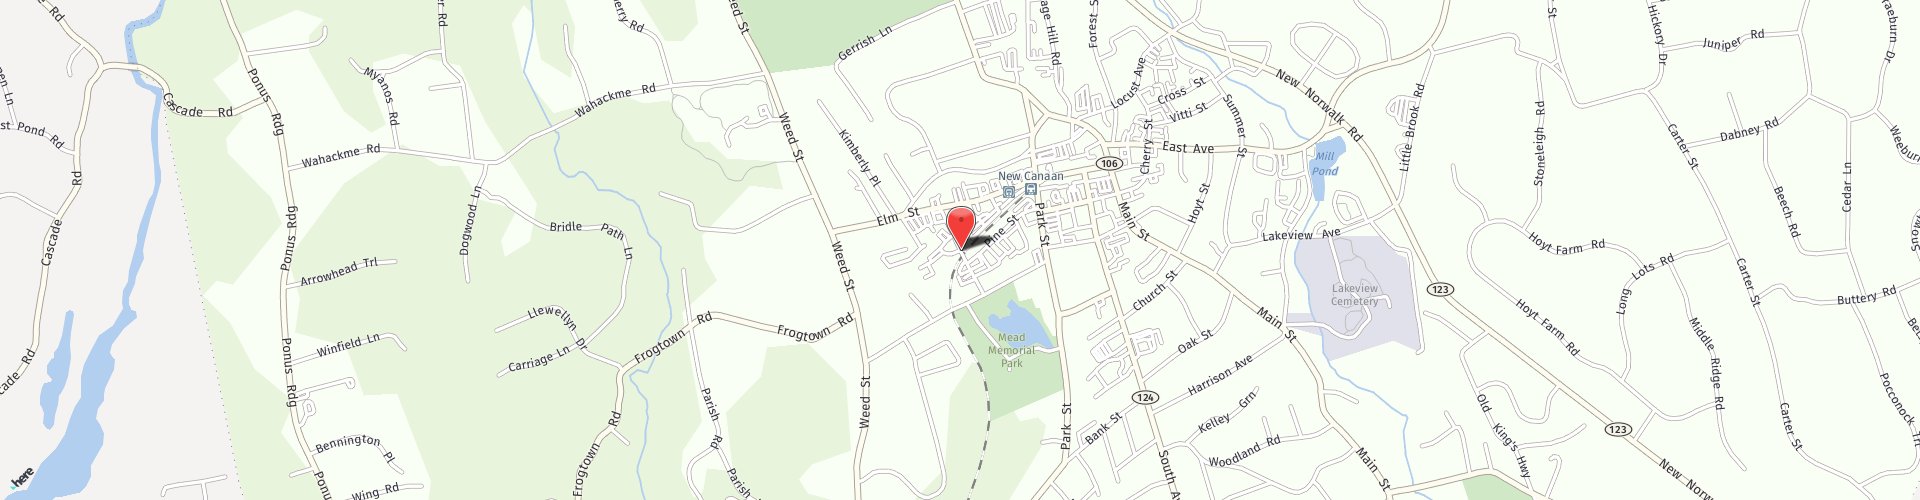 Location Map: 45 Grove Street New Canaan, CT 06840